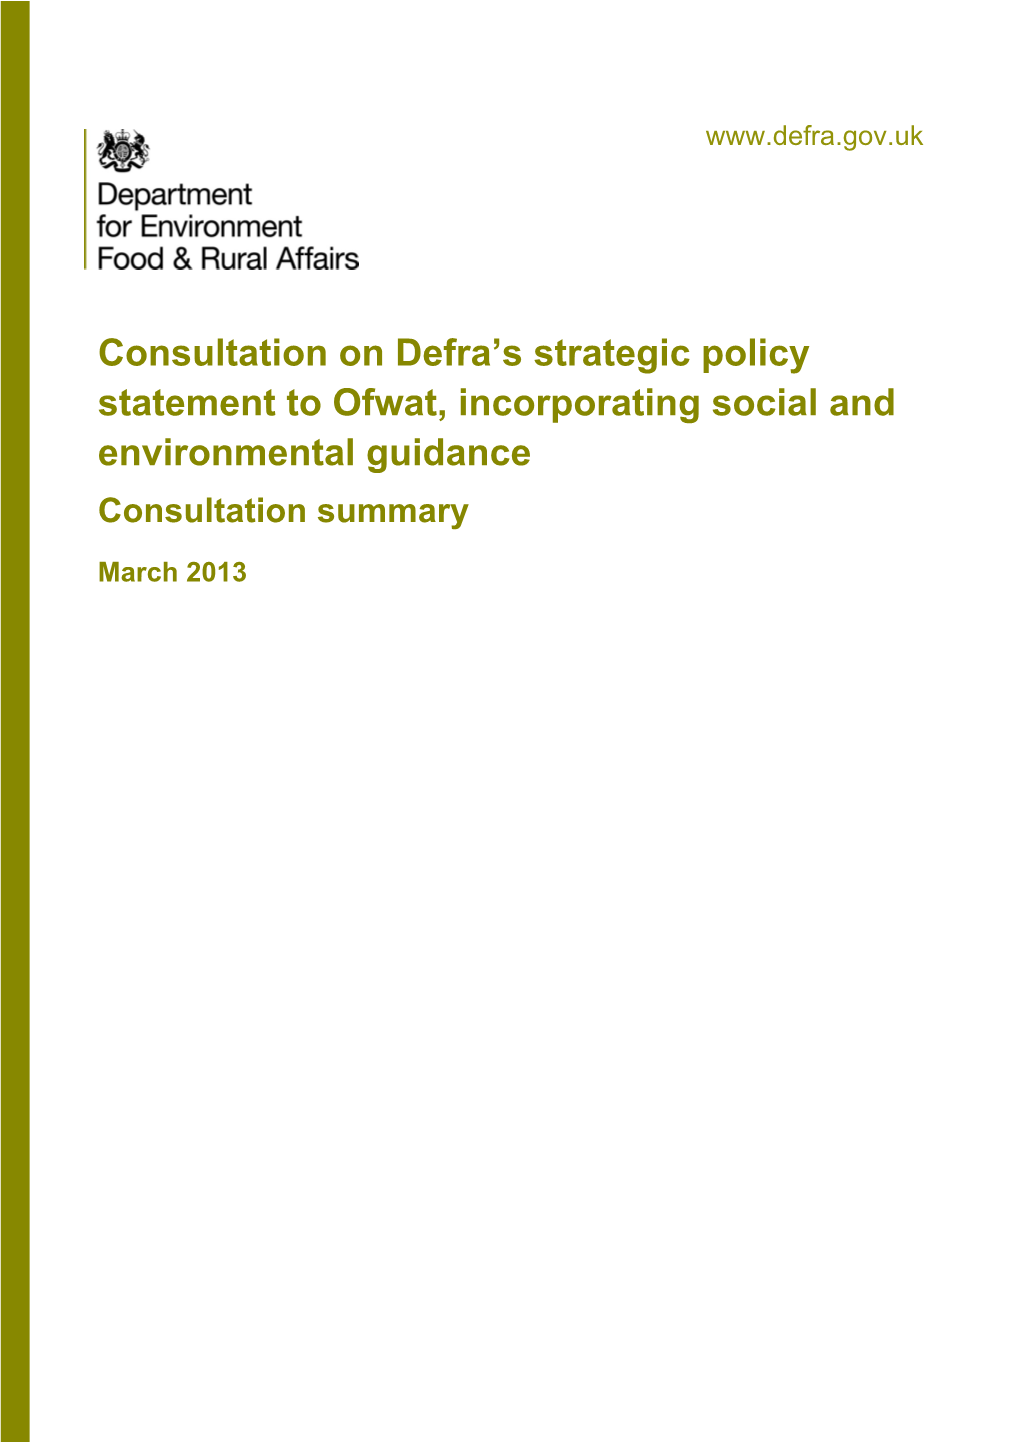 Consultation on Defra's Strategic Policy Statement to Ofwat, Incorporating Social and Environmental Guidance